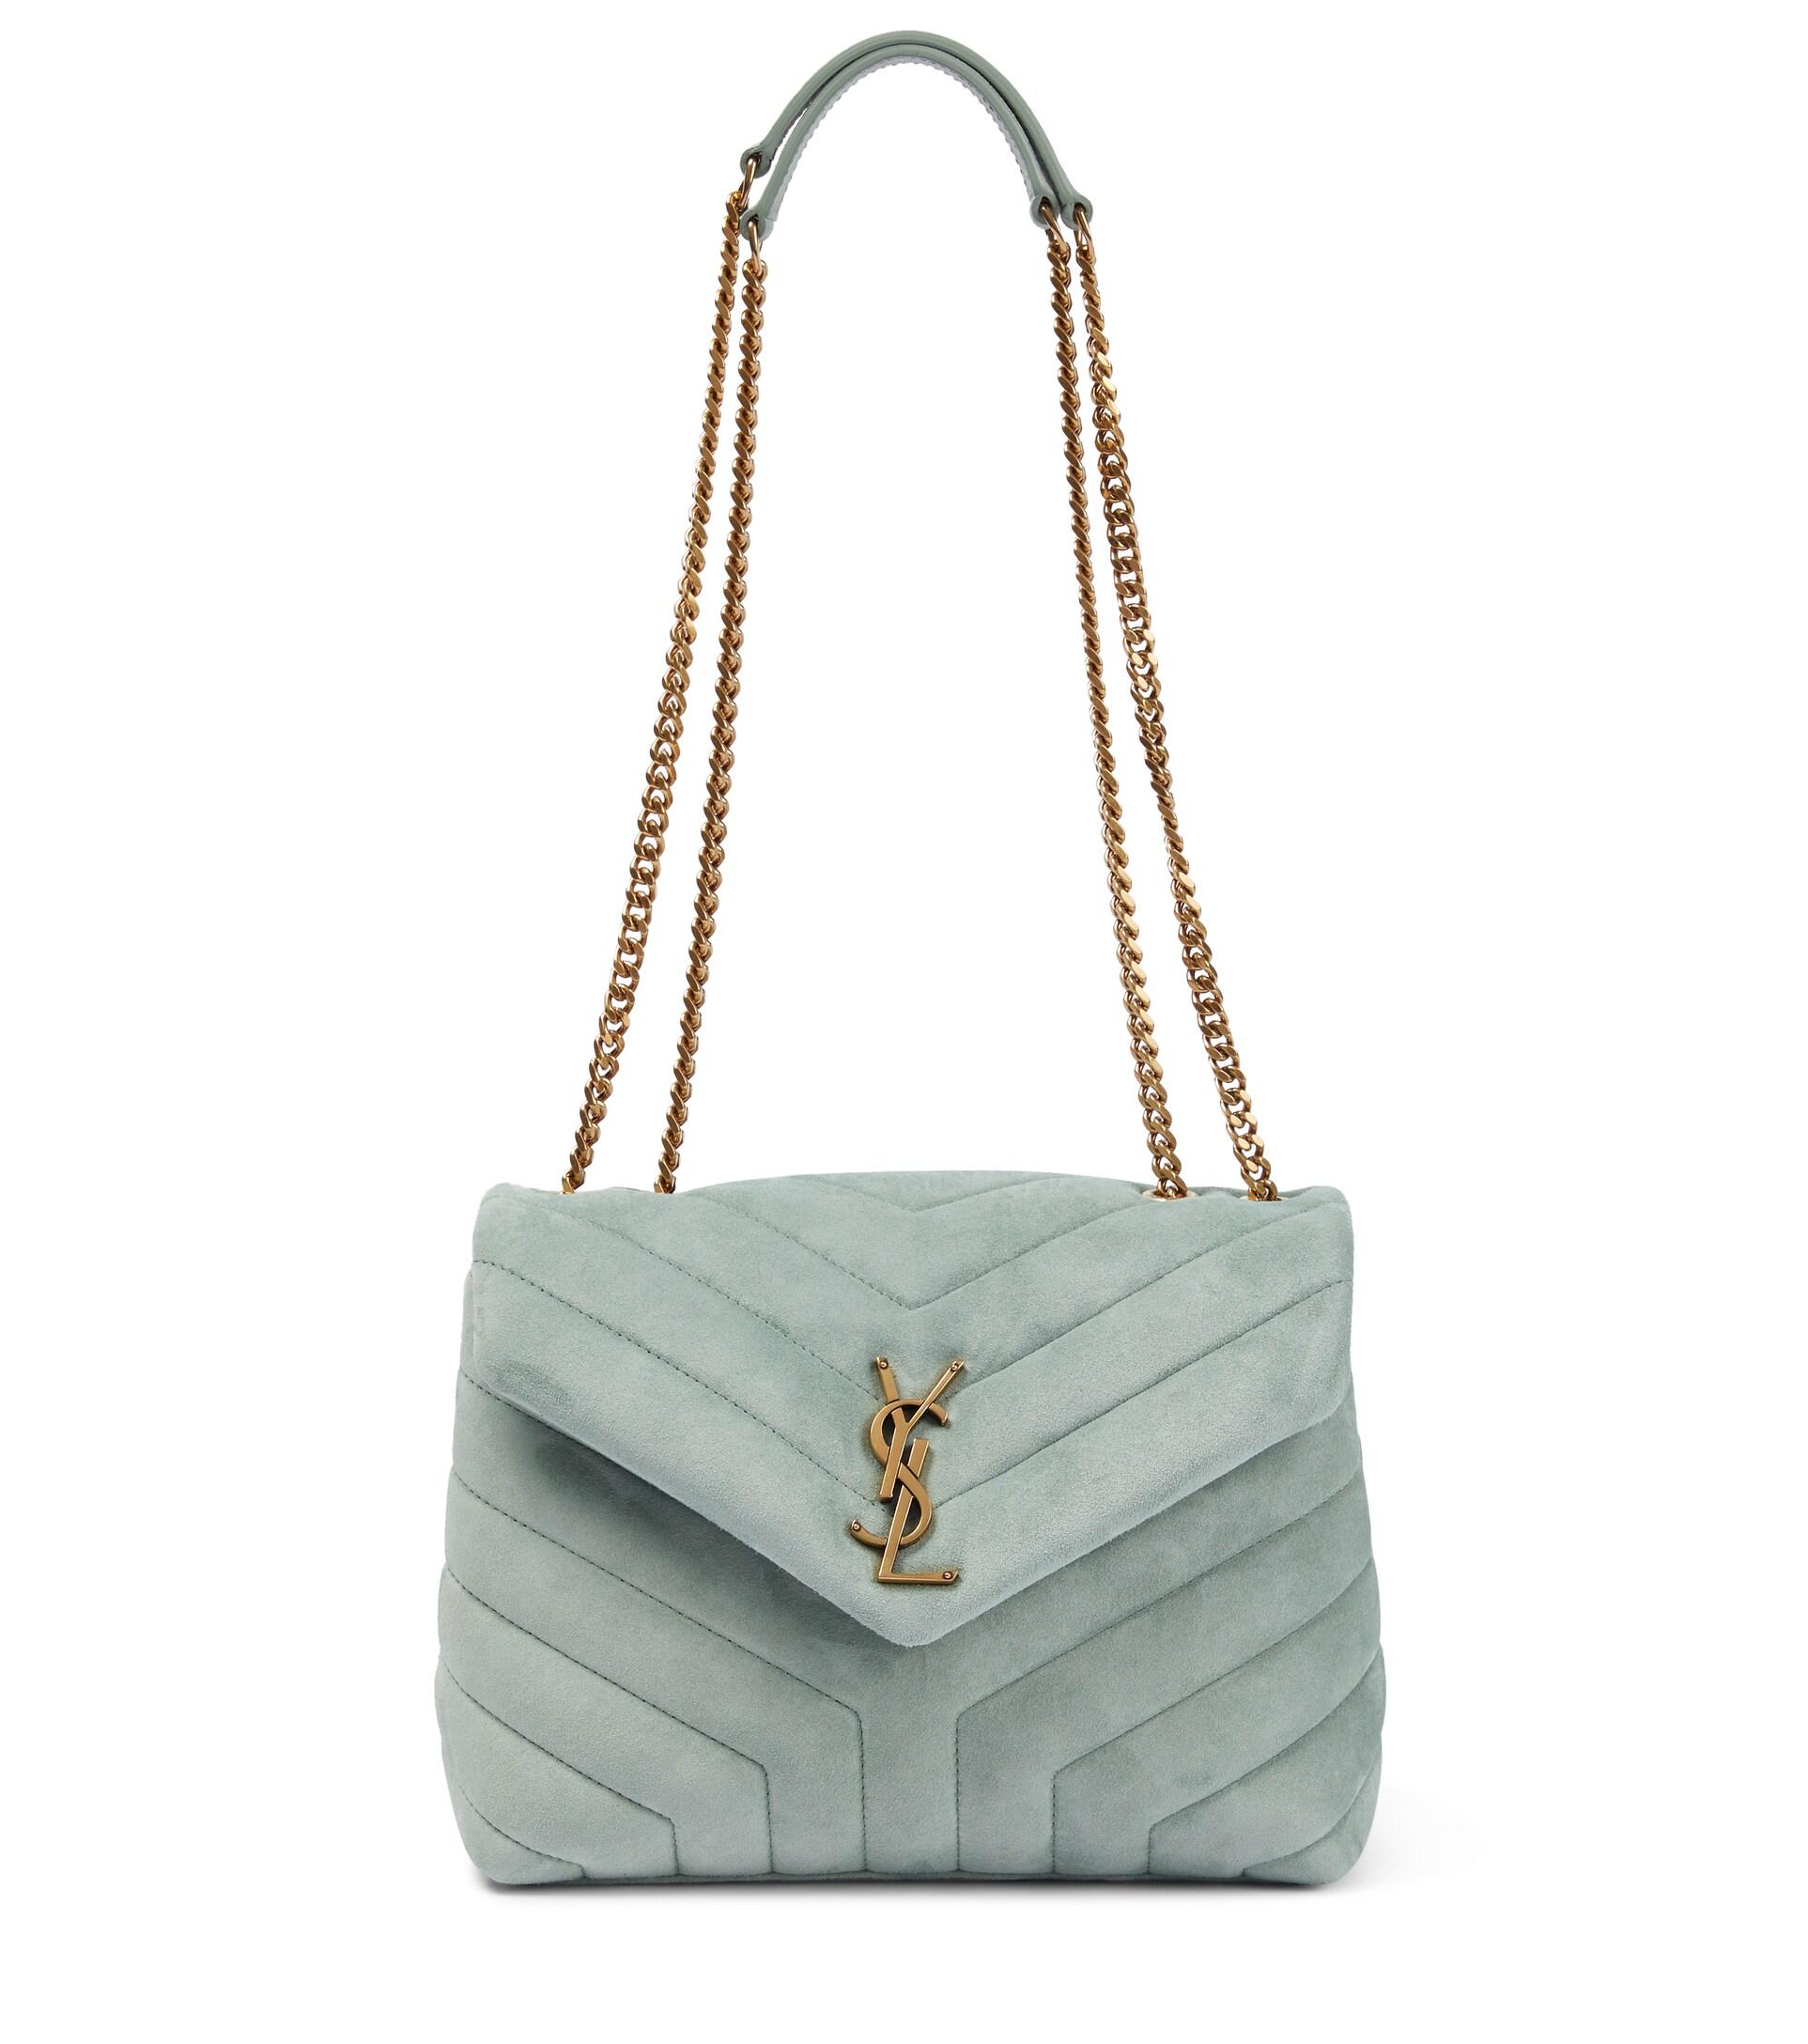 Saint Laurent Loulou Small Suede Shoulder Bag in Green | Lyst